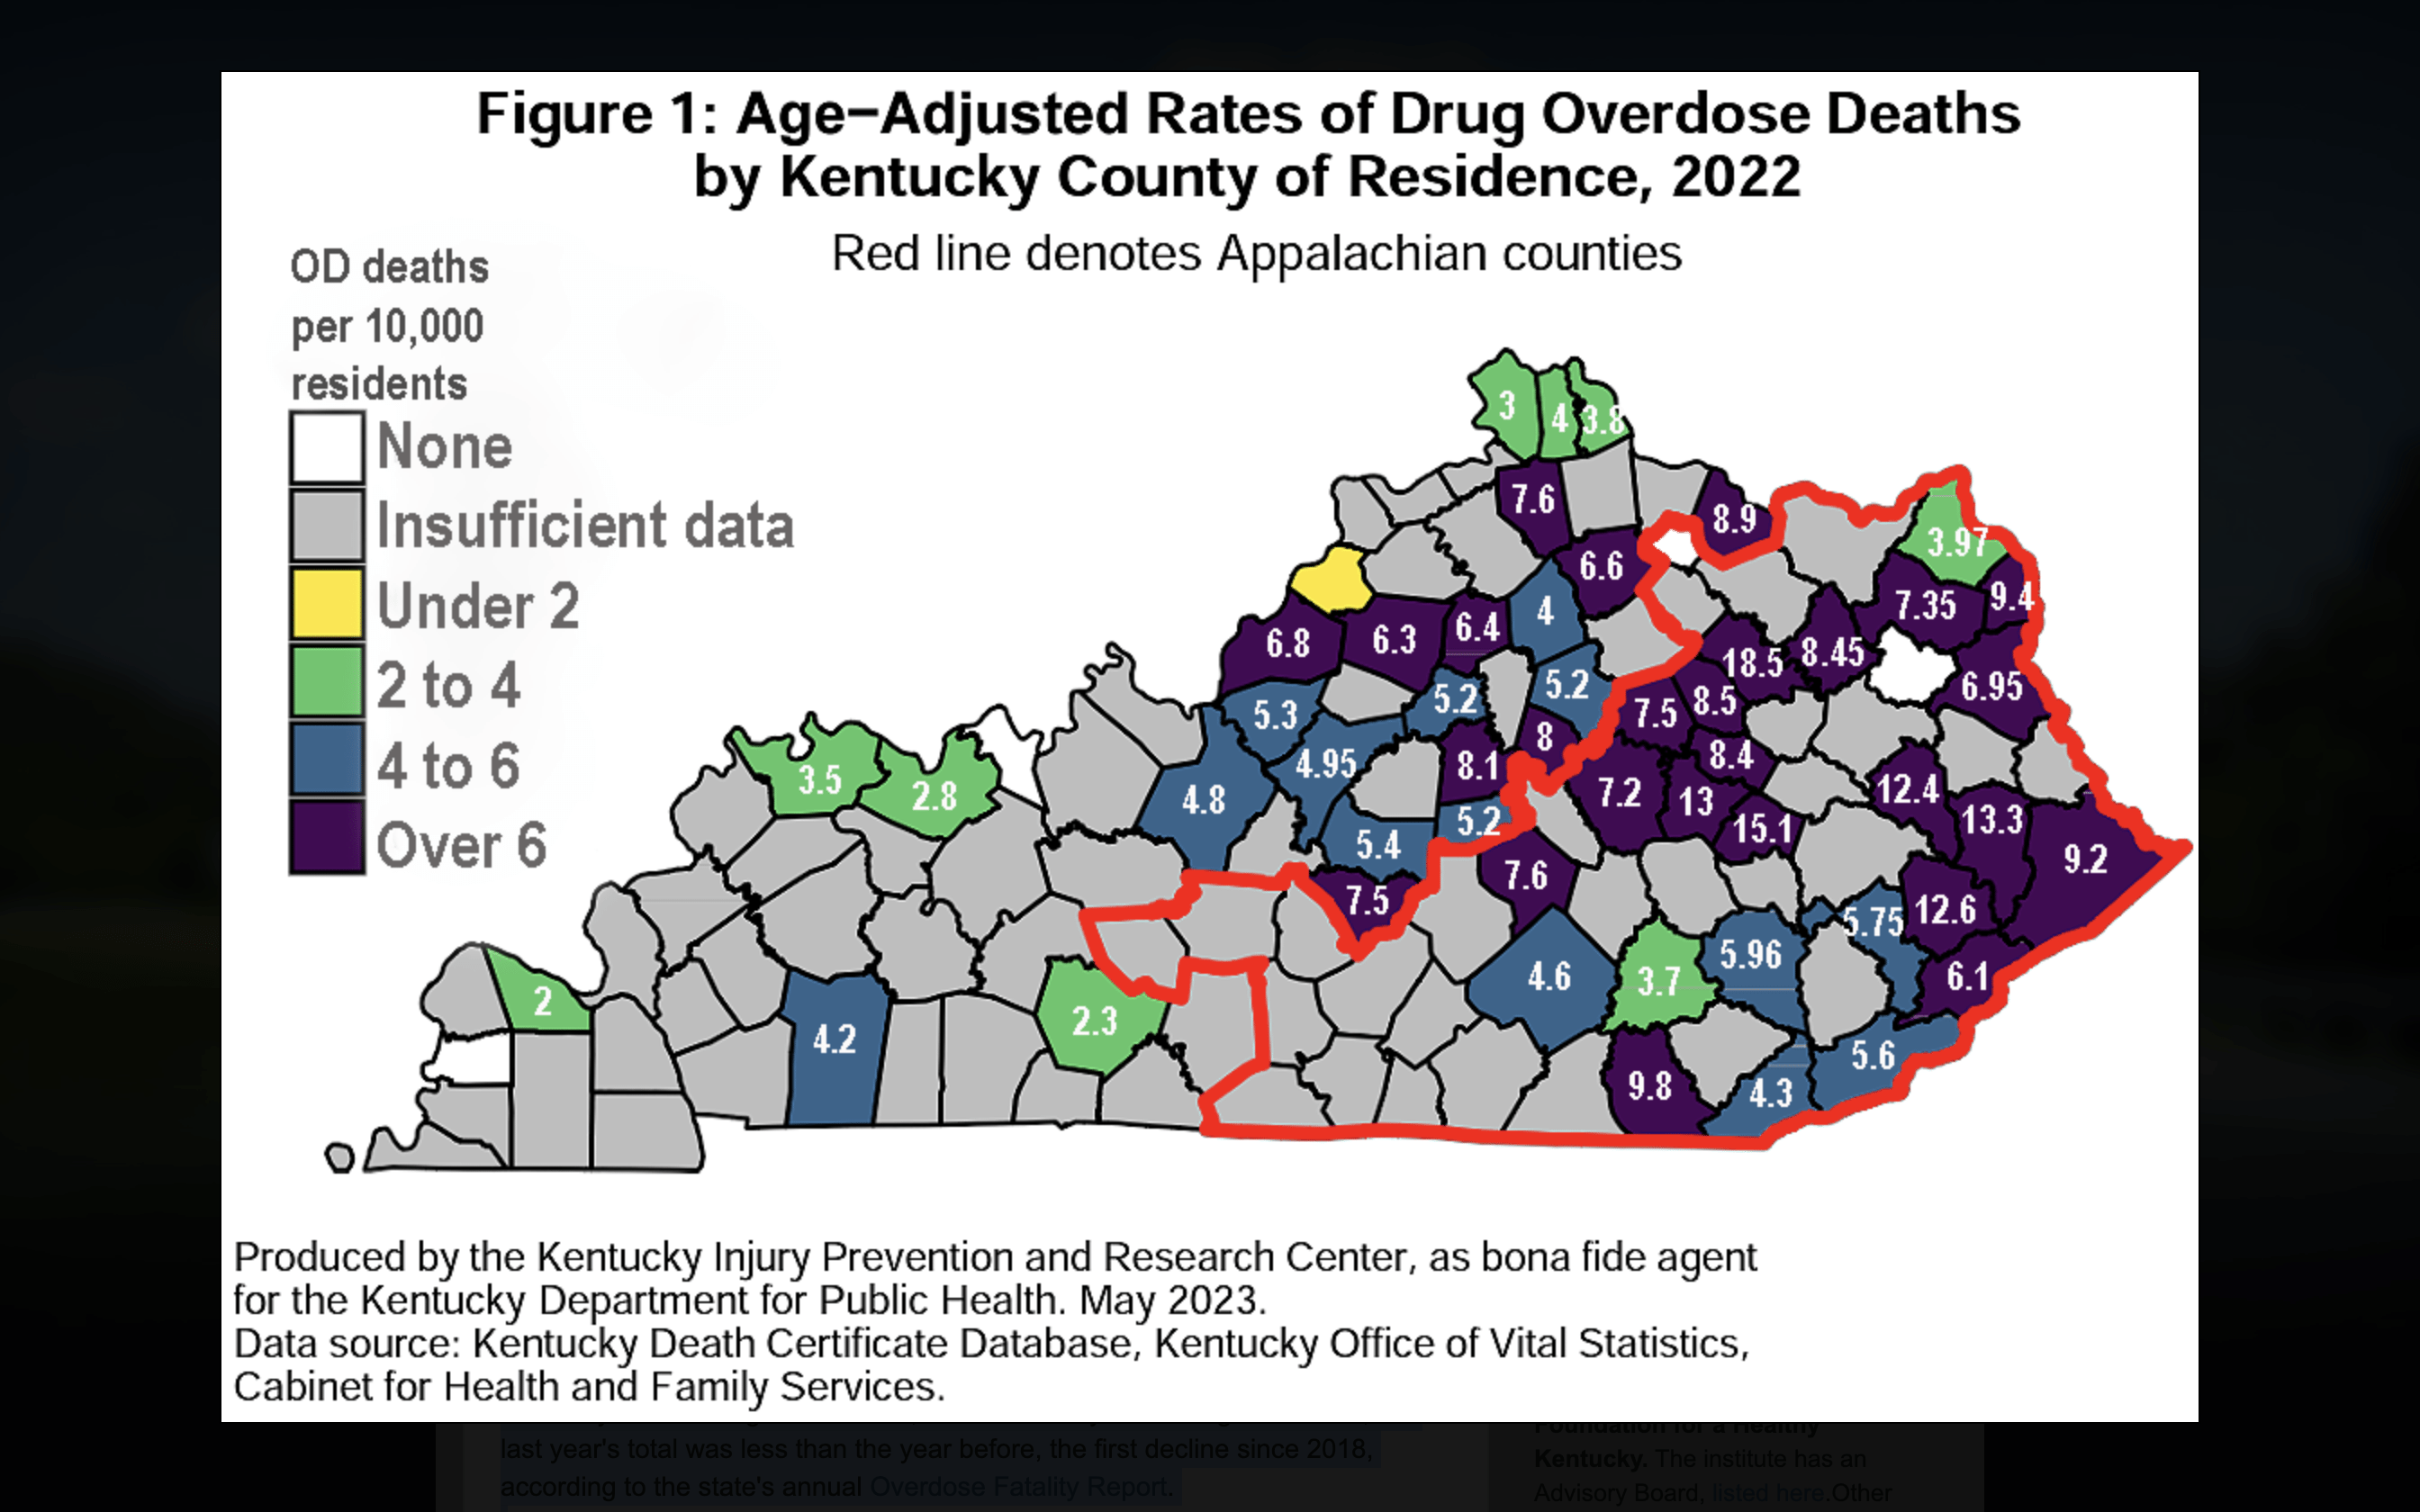 Kentucky had 5% fewer drug overdose deaths in 2022 than in '21